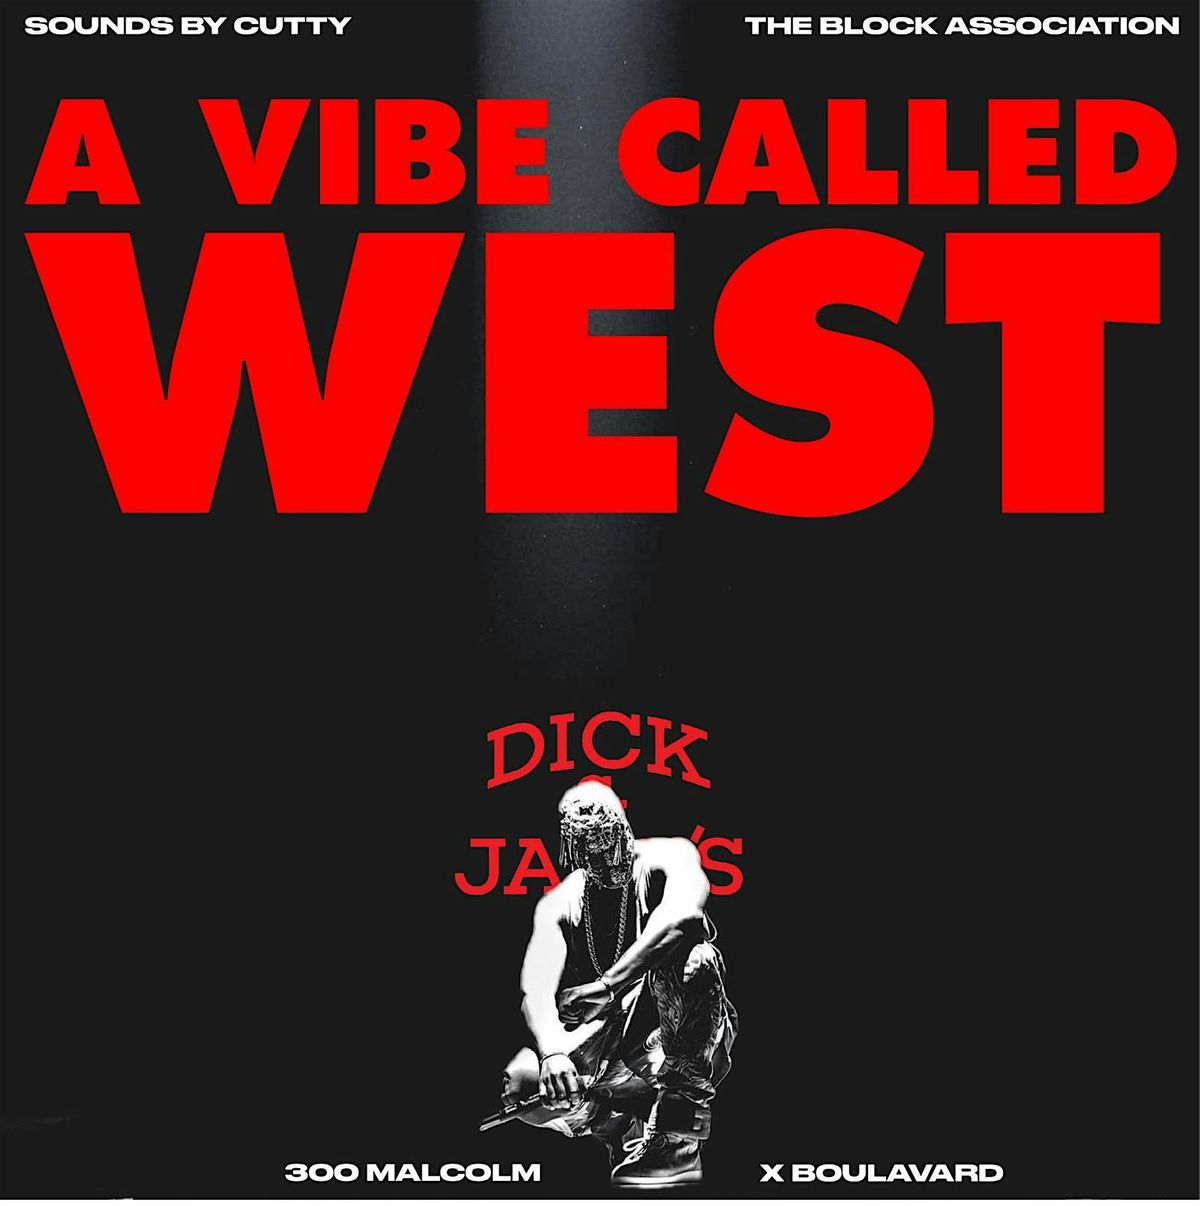 "A VIBE CALLED WEST"